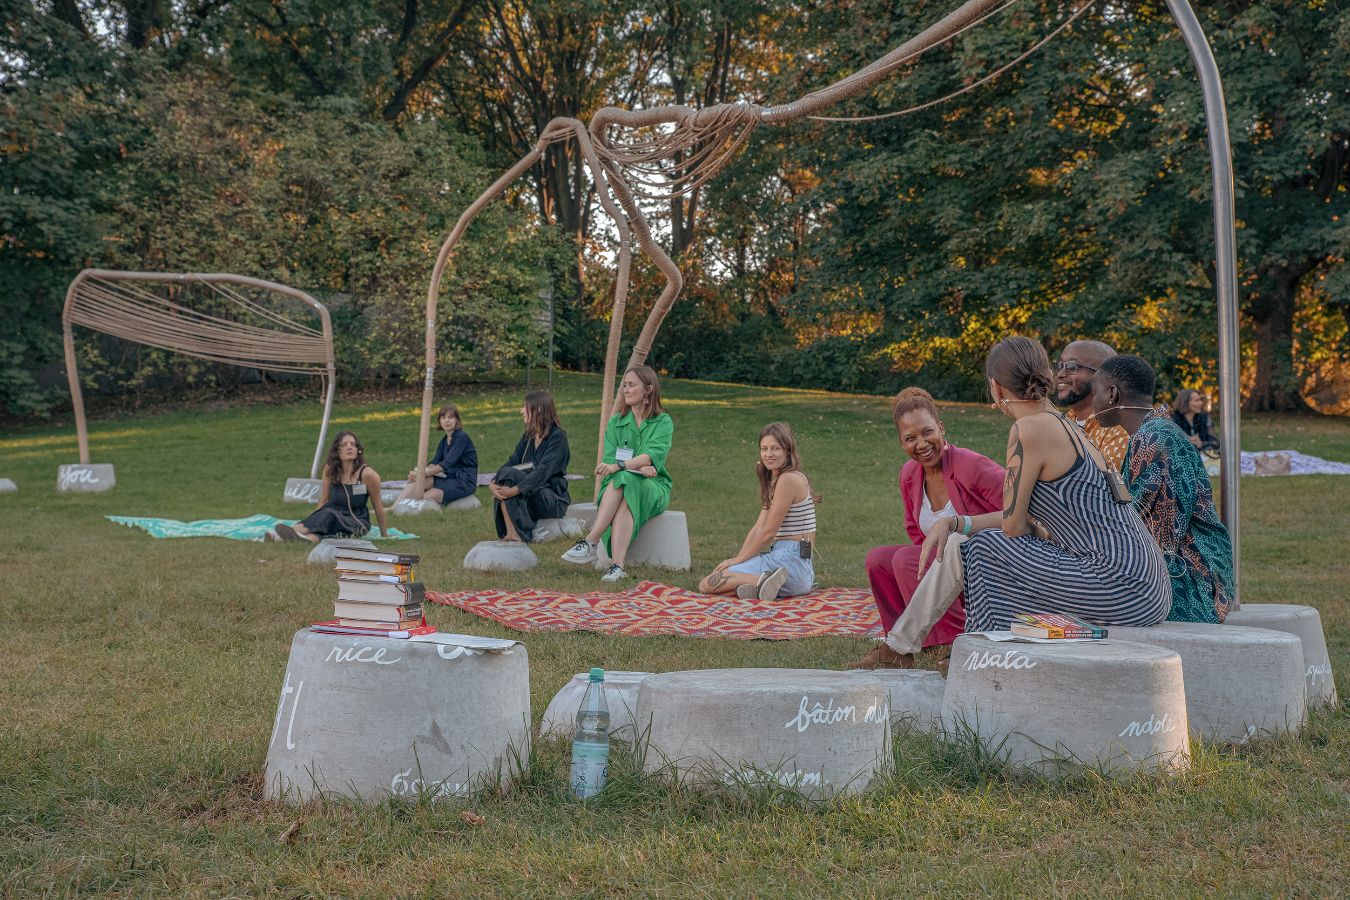 Abak Safaei-Rad reads excerpts from the eight shortlisted books together with members of the HKW team in the Forough Farrokhzad Garden, Haus der Kulturen der Welt,&nbsp;9.9.2023, Haus der Kulturen der Welt.
